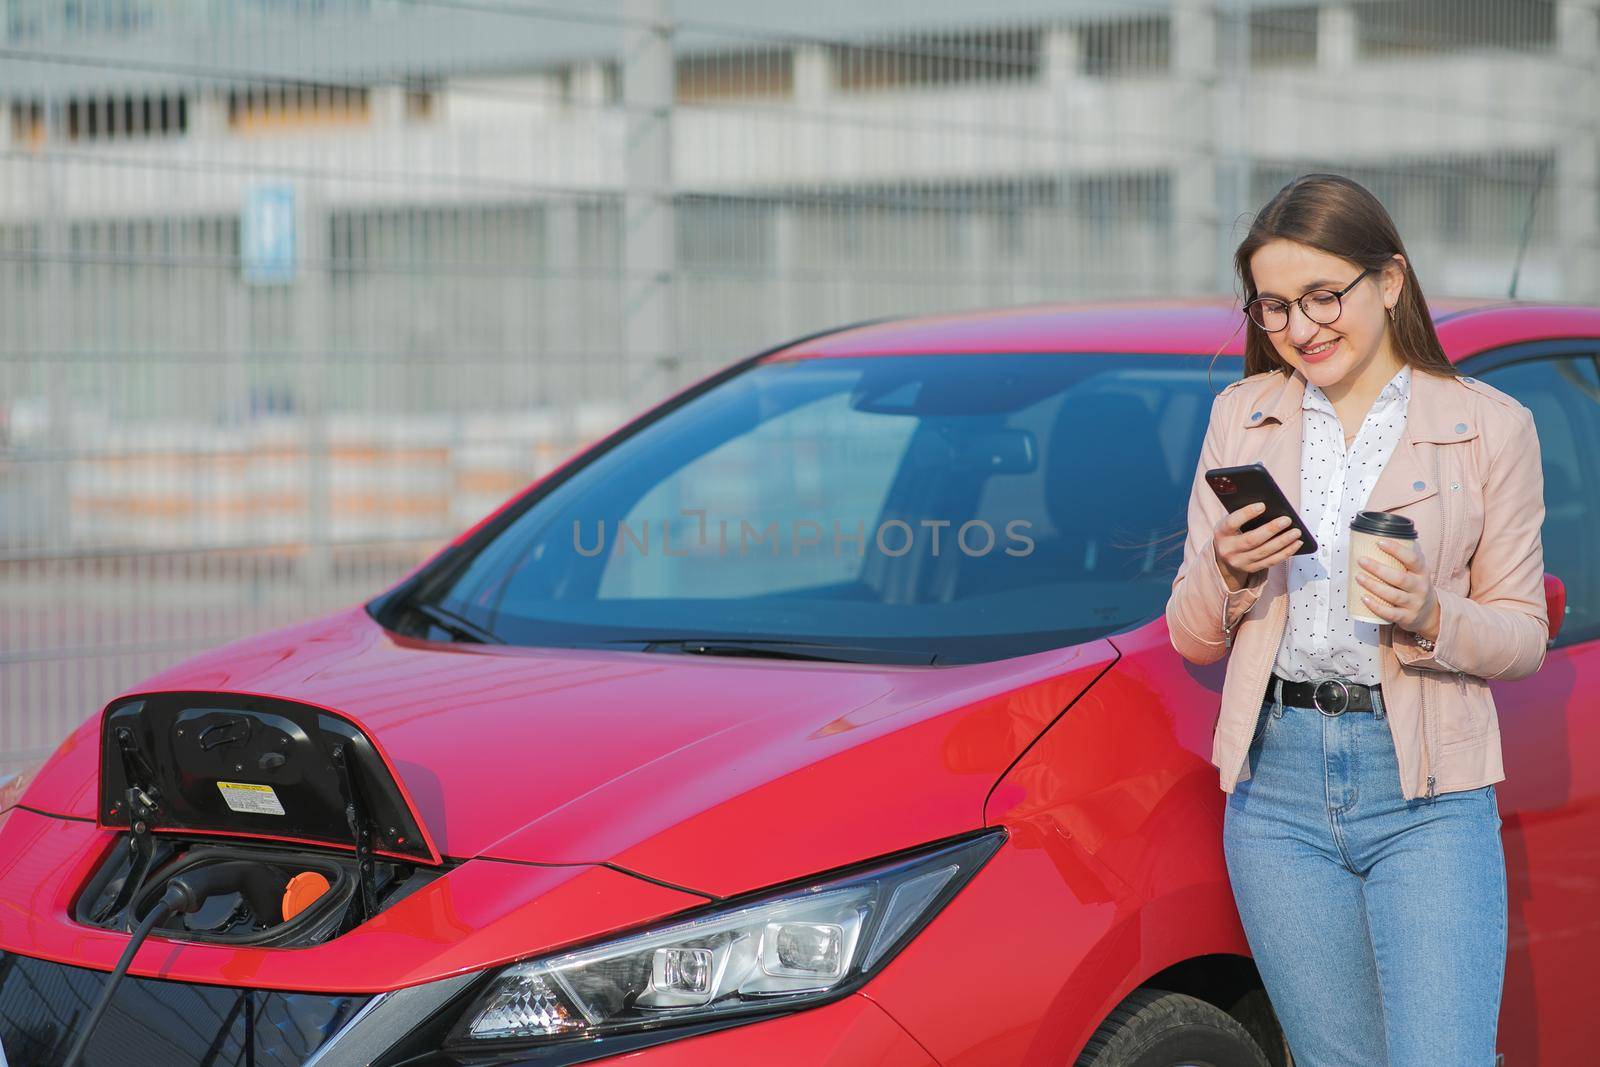 Girl Use Coffee Drink While Using Smart Phone and Waiting Power Supply Connect to Electric Vehicles for Charging the Battery in Car.